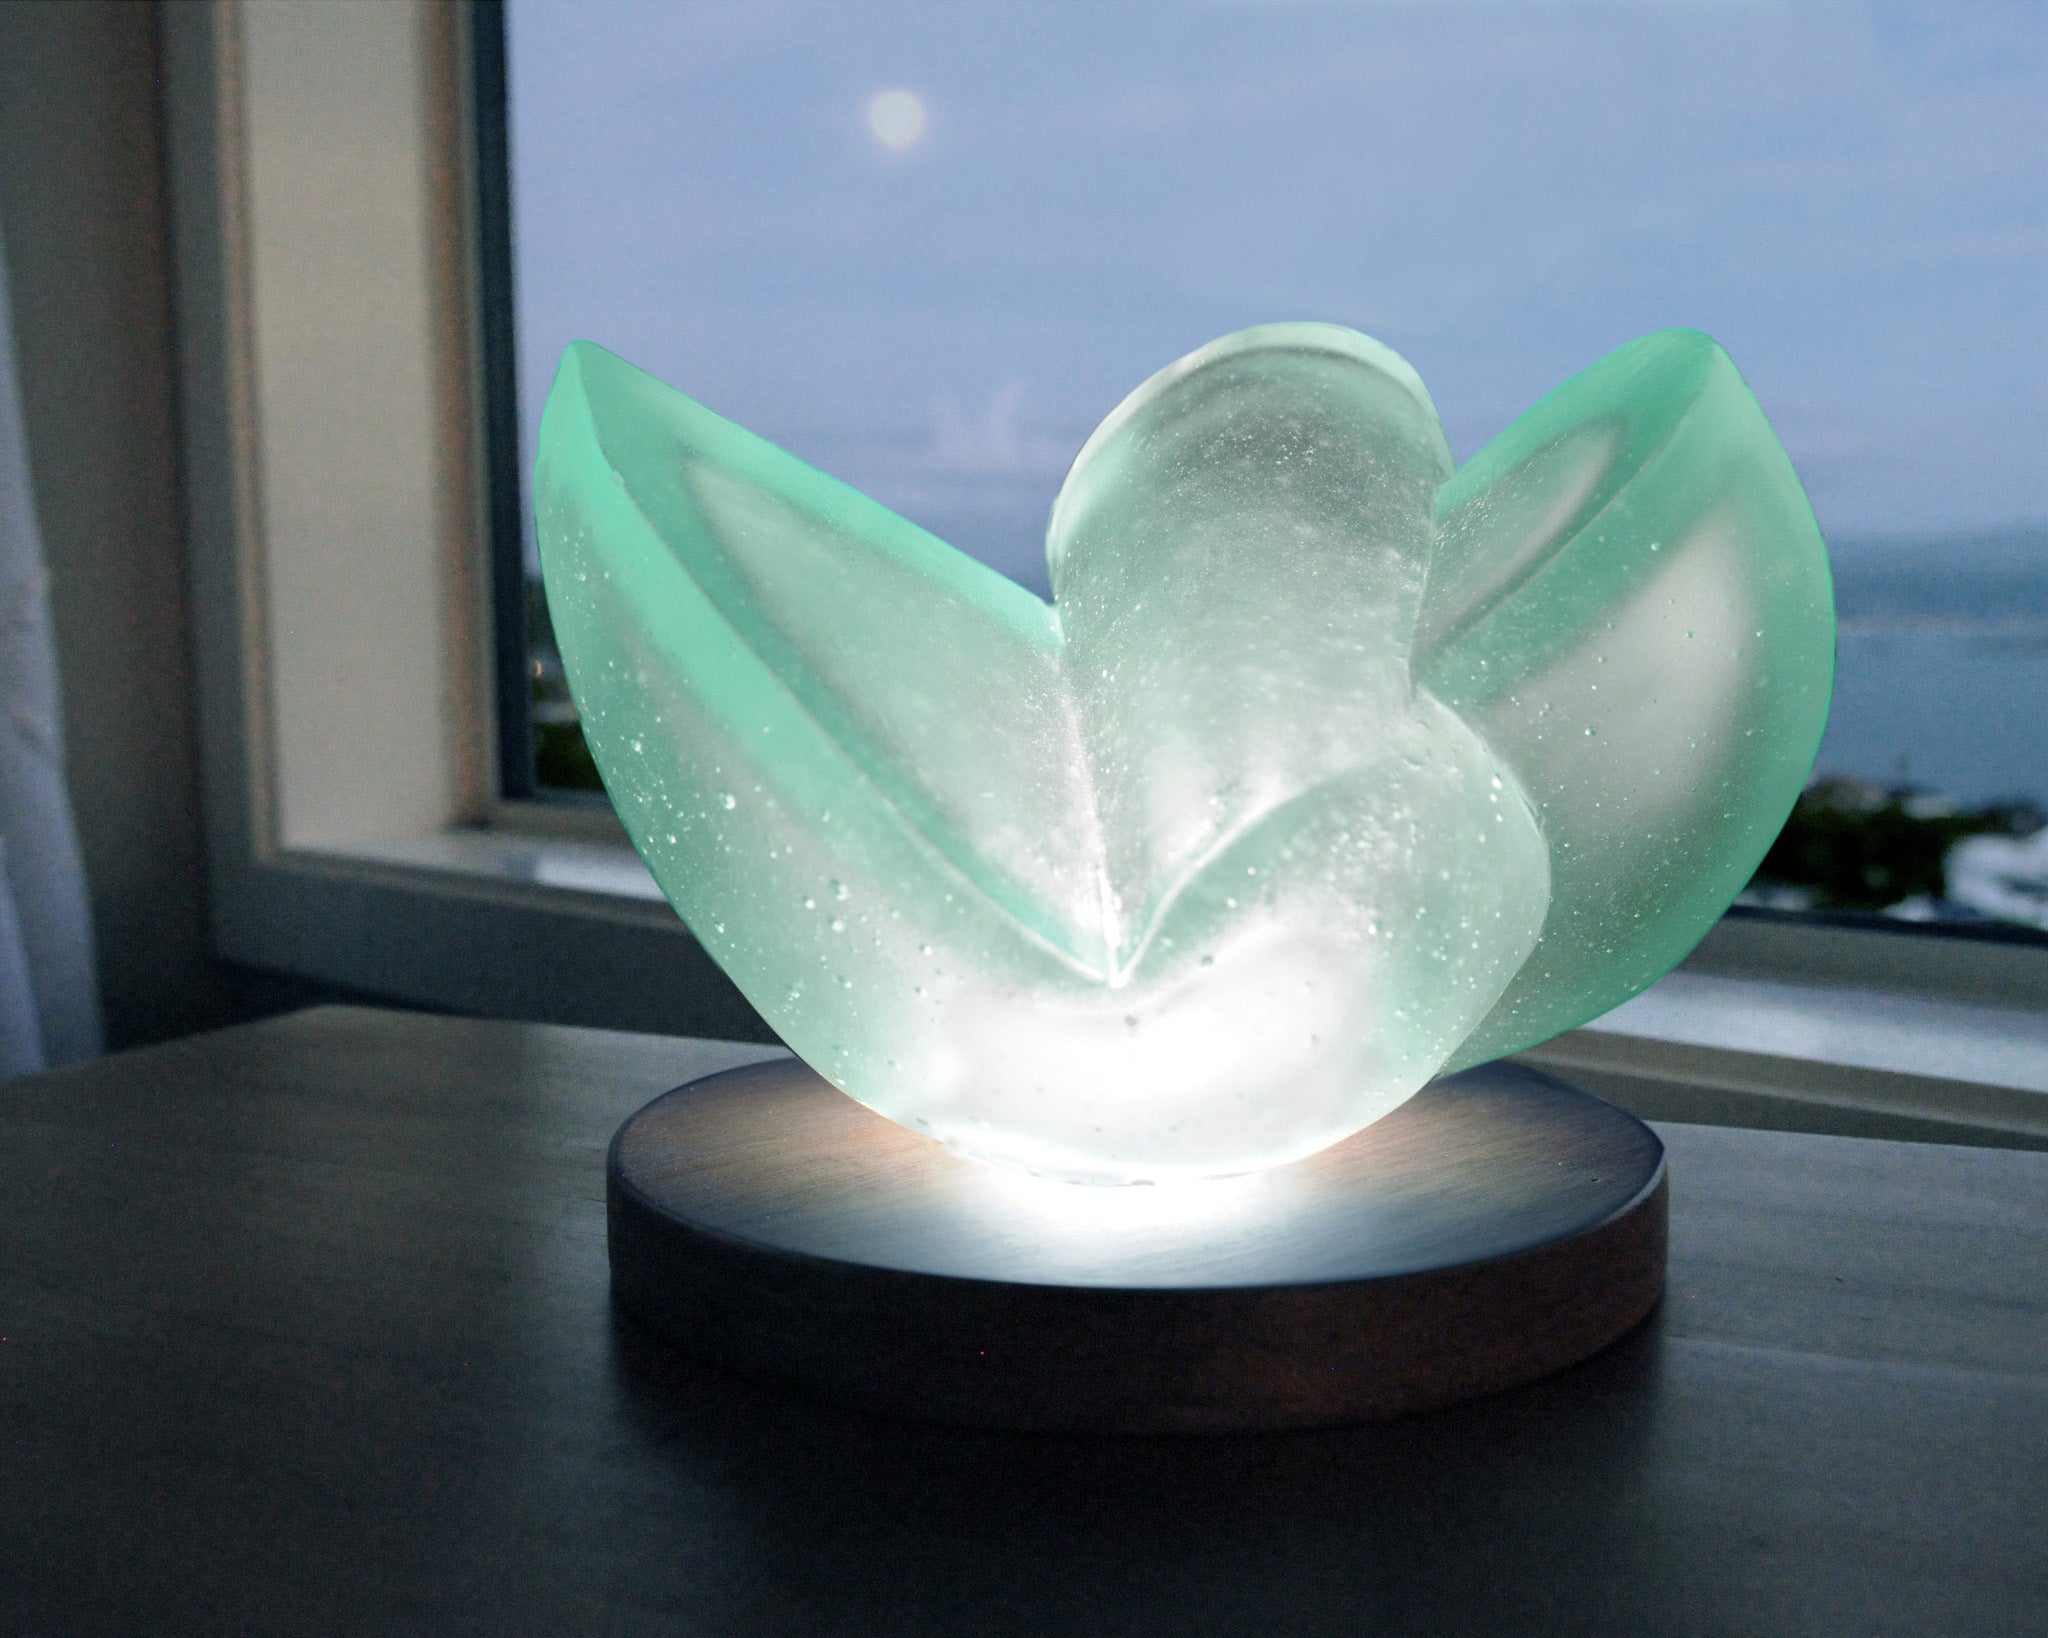 Abstract minimalist cast glass sculpture with light for sale by Stephen Williams.